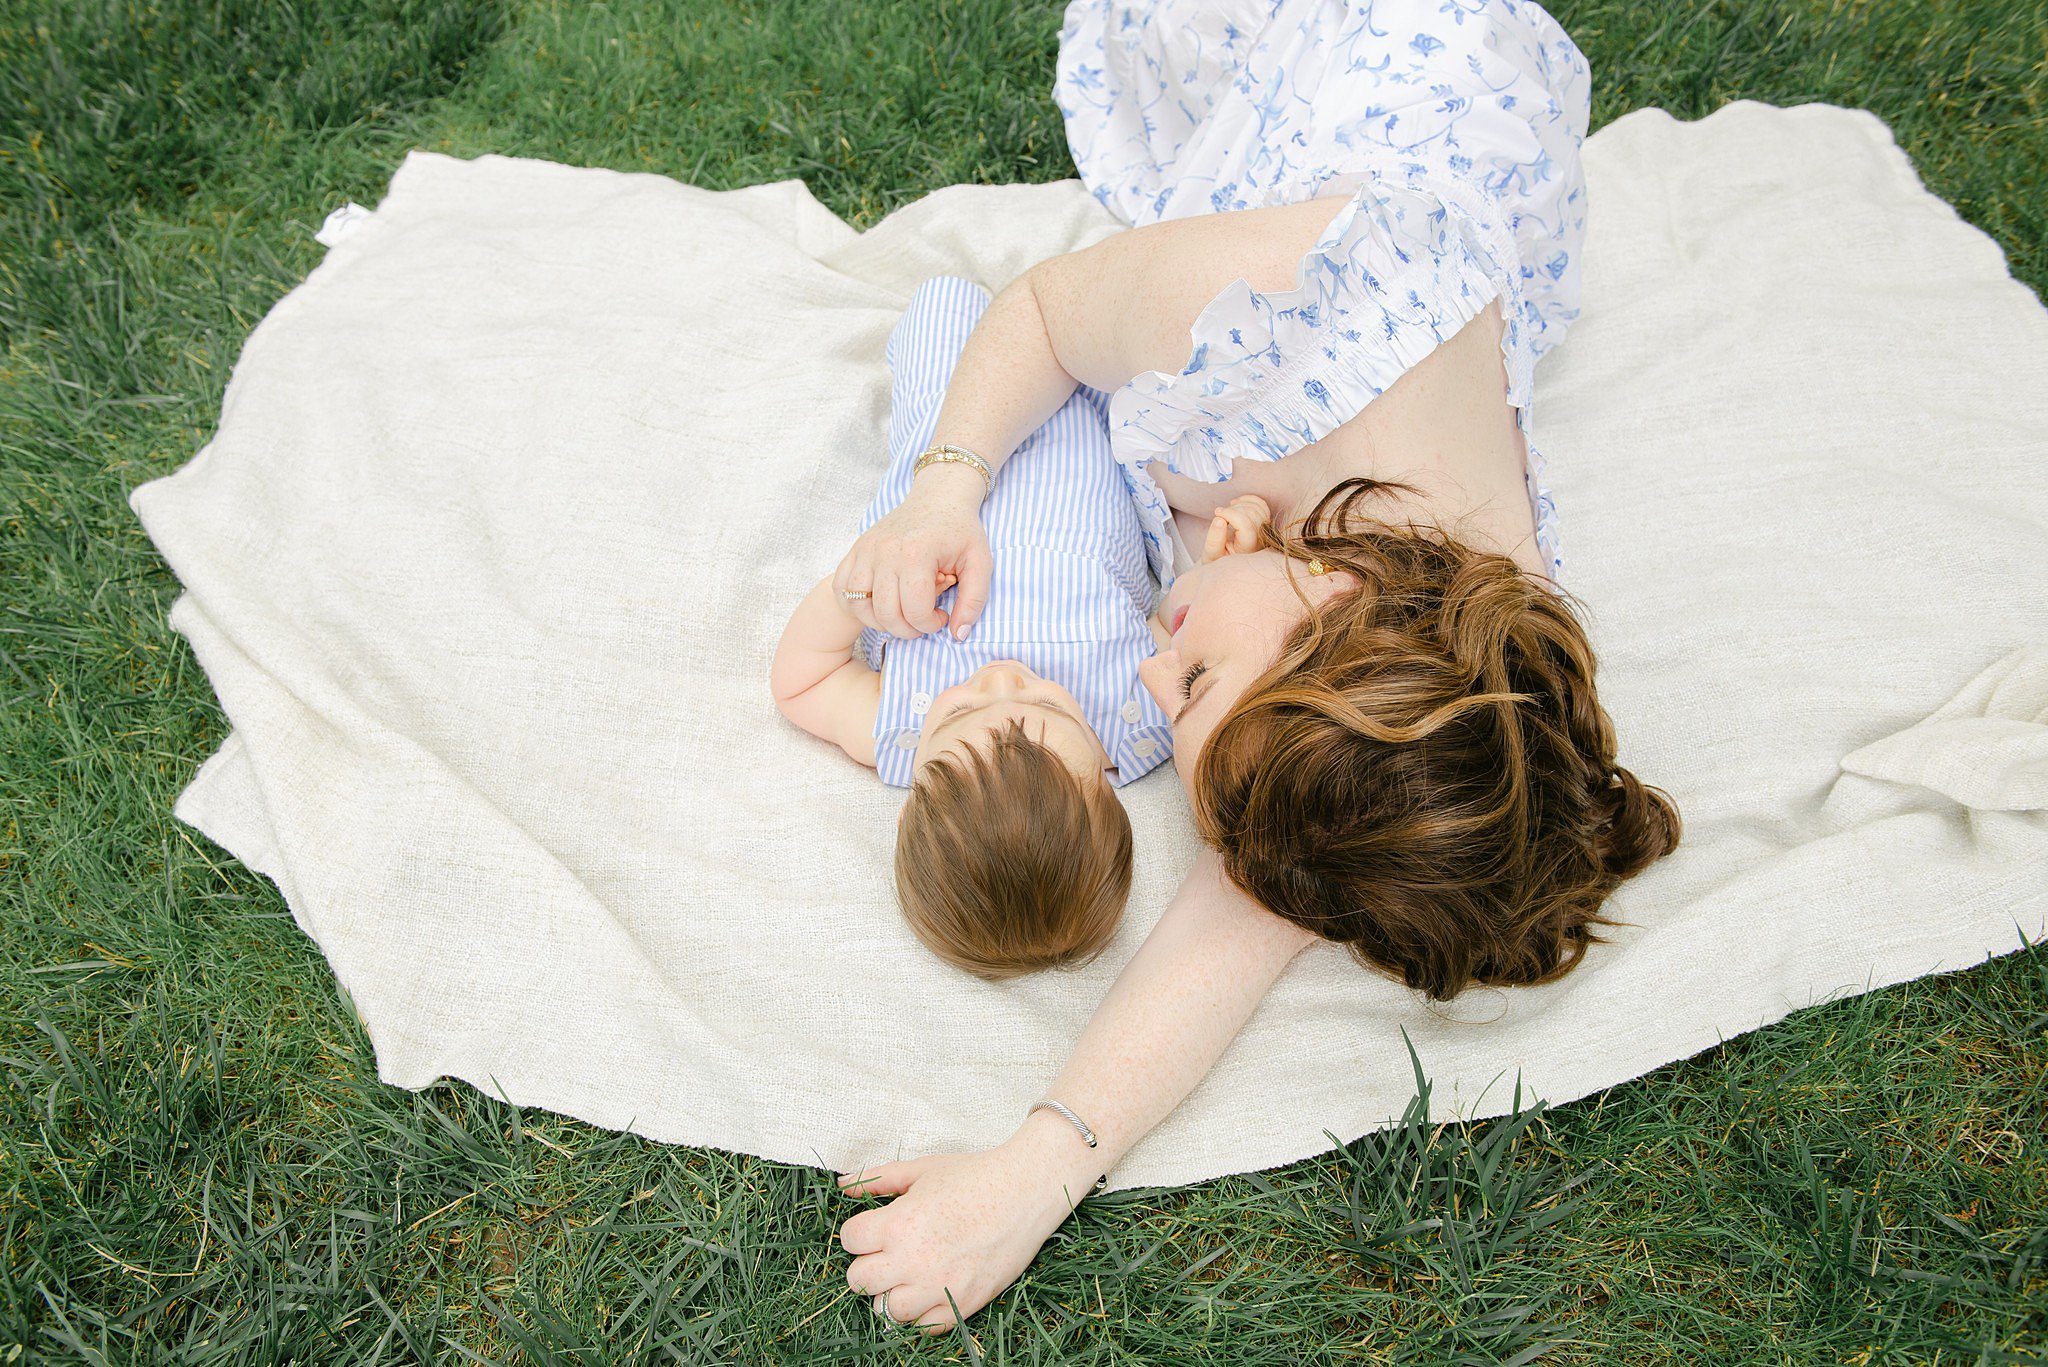 A mother in a blue dress lays on a picnic blanket in the grass with her toddler son in a blue striped onesie